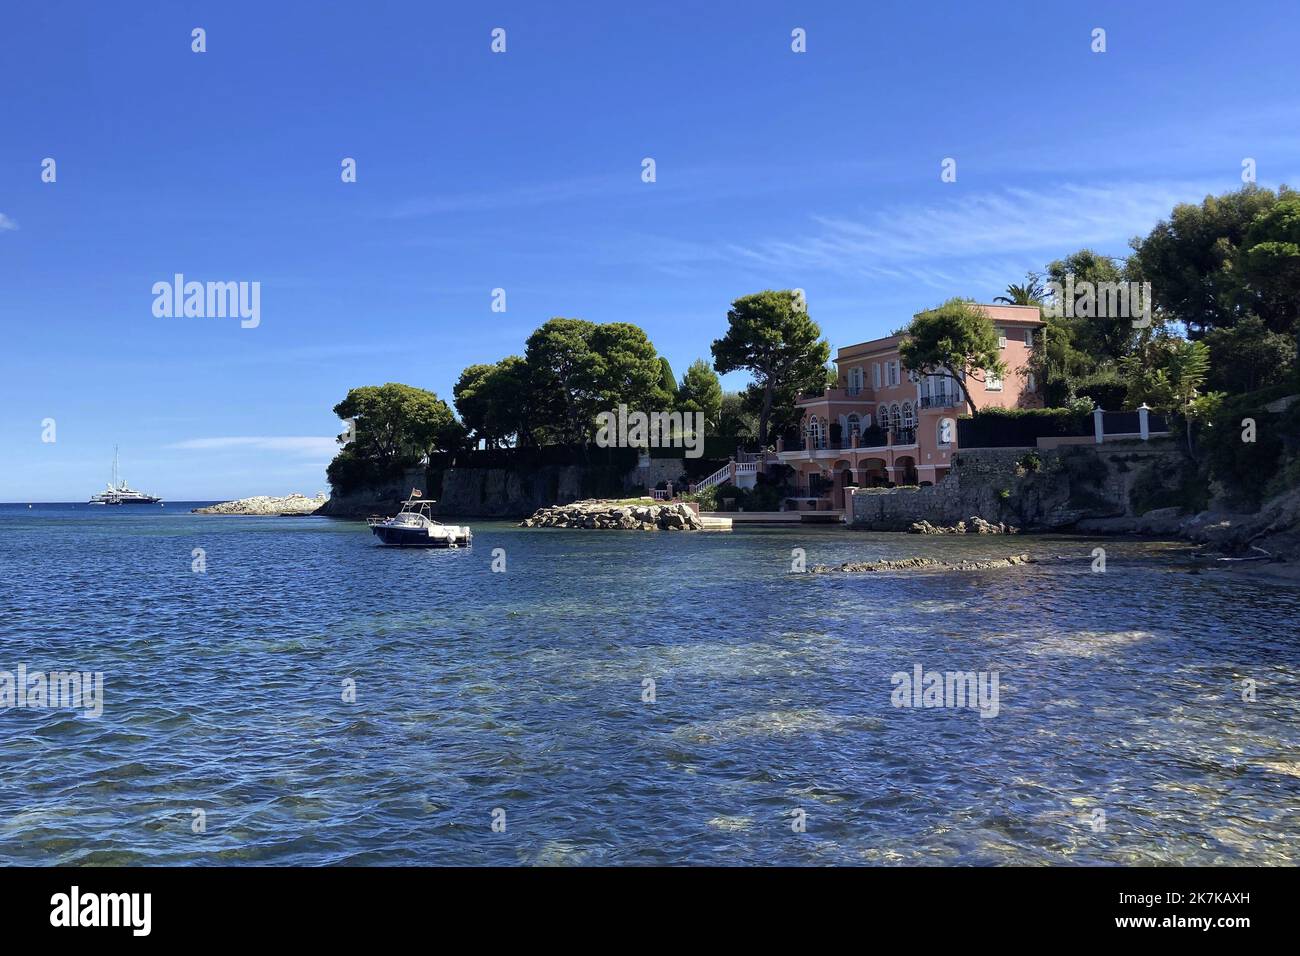 ©Francois Glories/MAXPPP - 09/09/2022 Villa 'La Fleur du Cap', known as Villa Socoglio, on the waterfront in Saint Cap Ferrat French Riviera, built in 1880 by the son of an arms dealer. It later hosted the Duchess of Marlborough, King Leopold III, Charlie Chaplin and David Niven. The villa was used for the filming of 'The Pink Panther Trail' (1982). Current owners Ana Tzarev and Robert Chandler. Saint jean Cap Ferrat France. Stock Photo